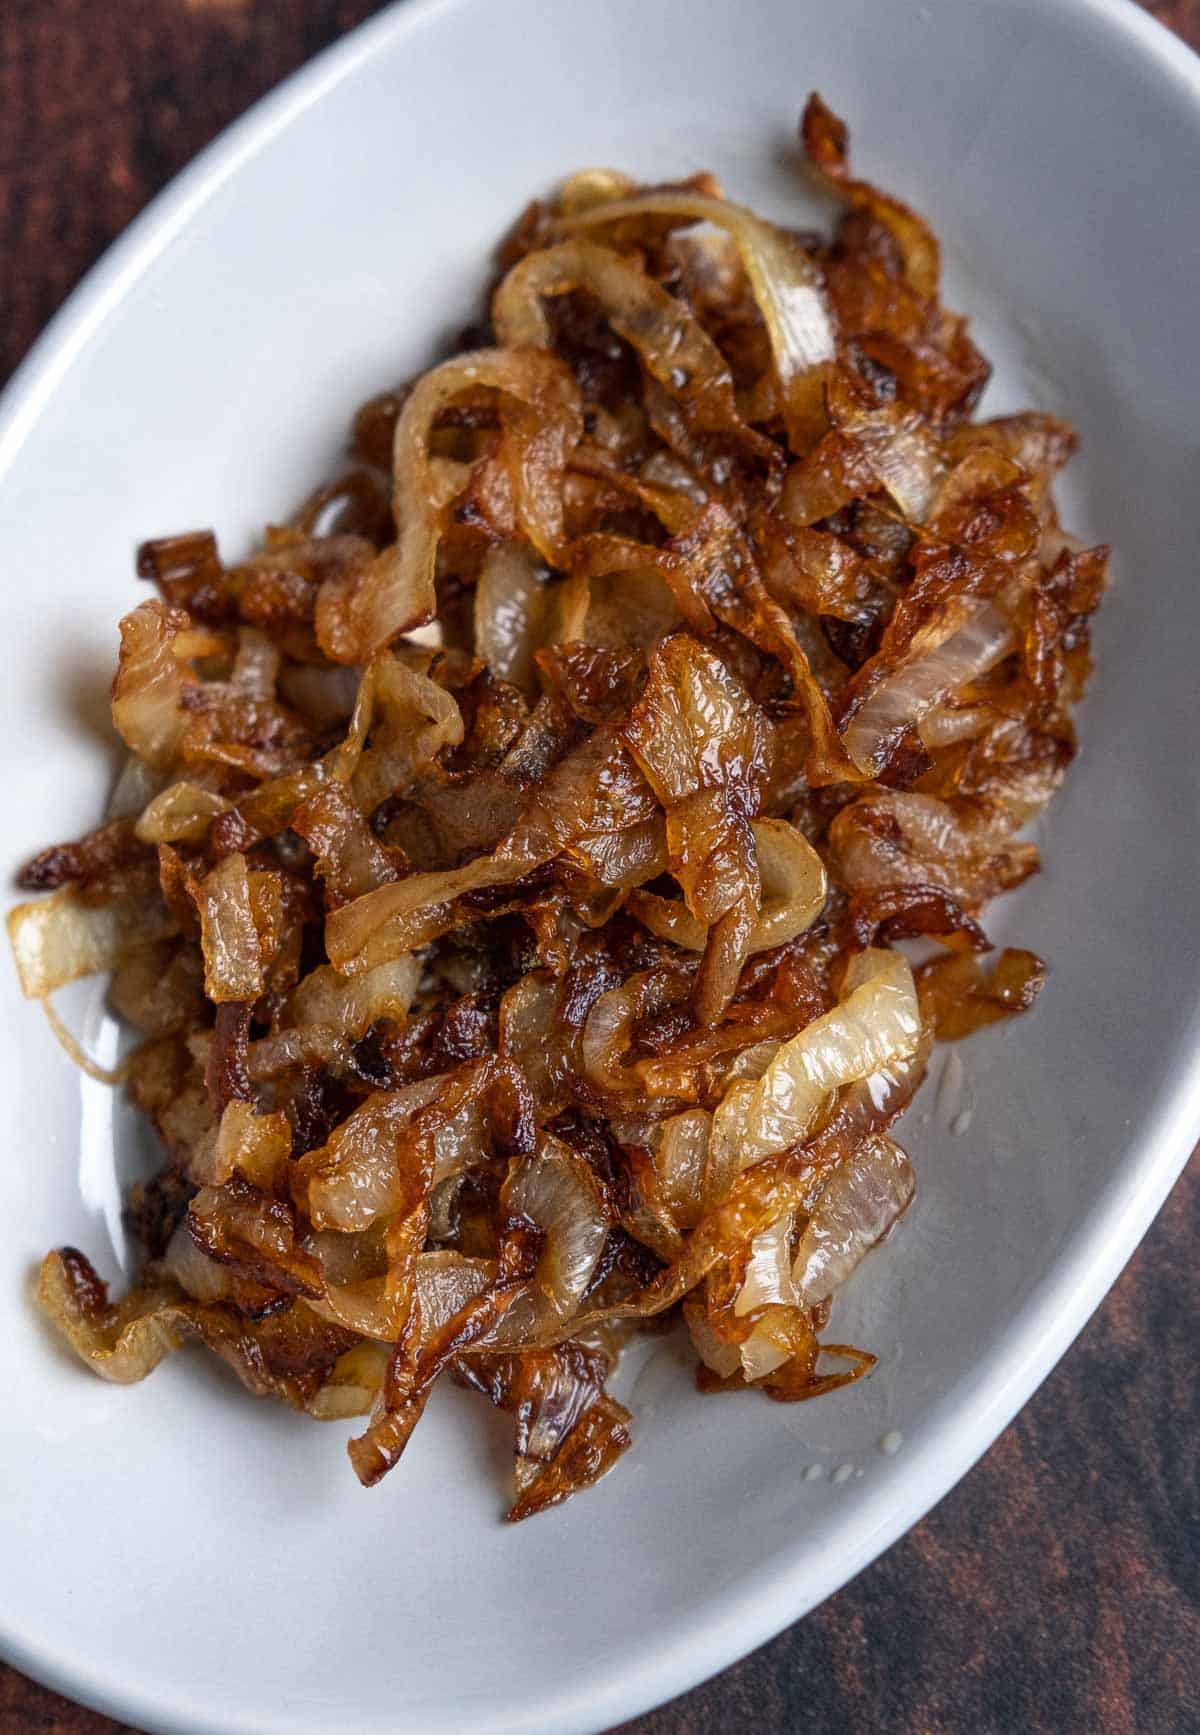 A white onion fully caramelized 